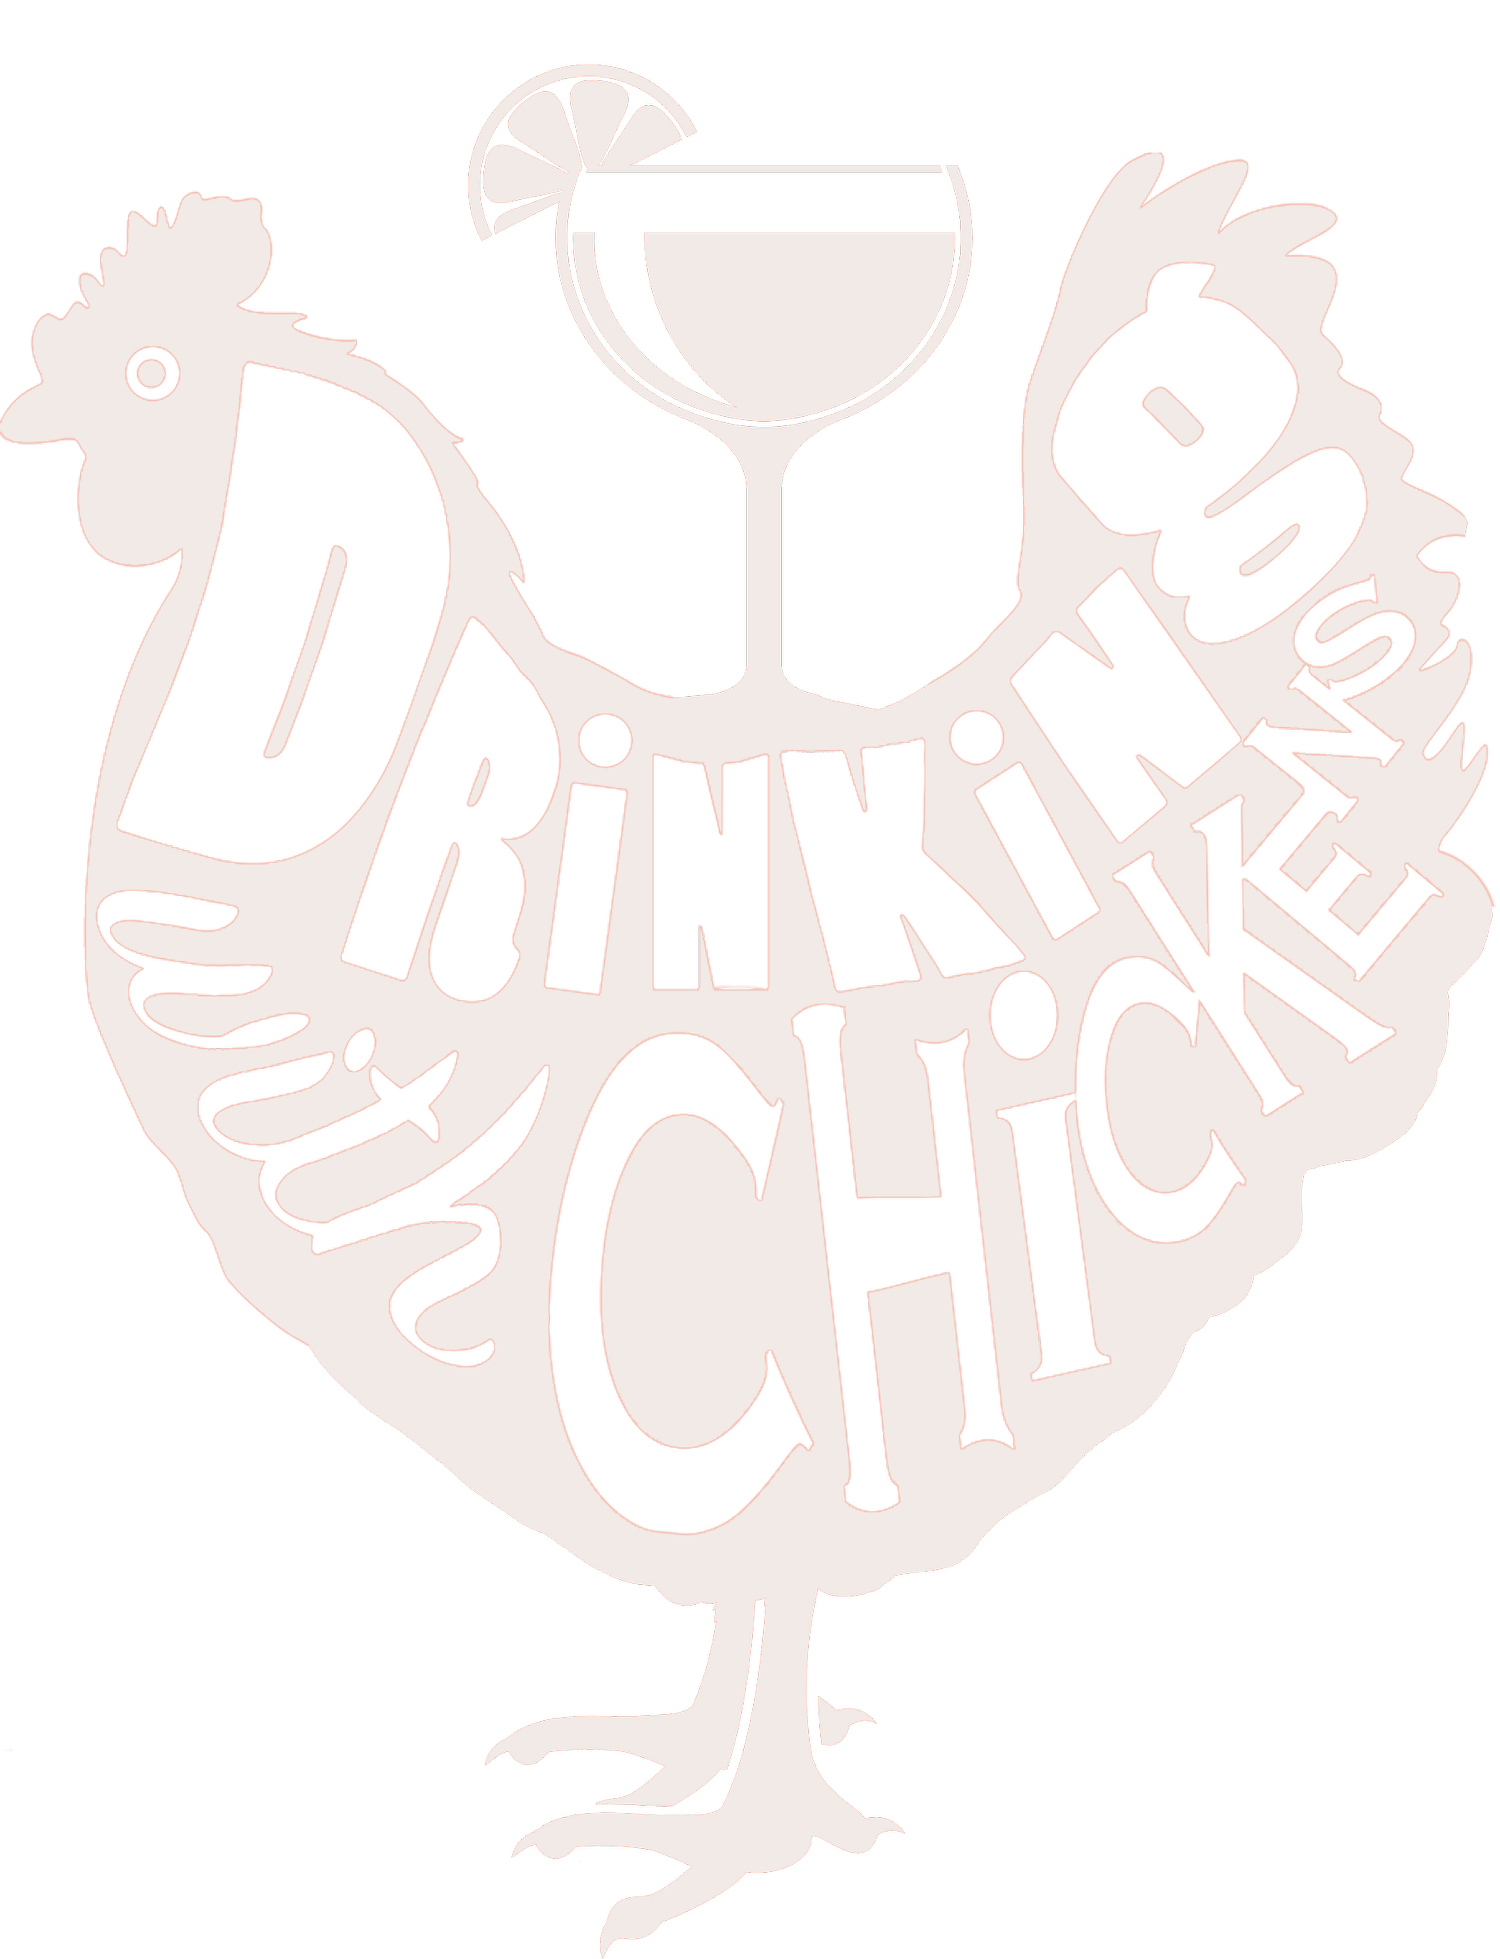 Drinking With Chickens- Craft cocktail recipes